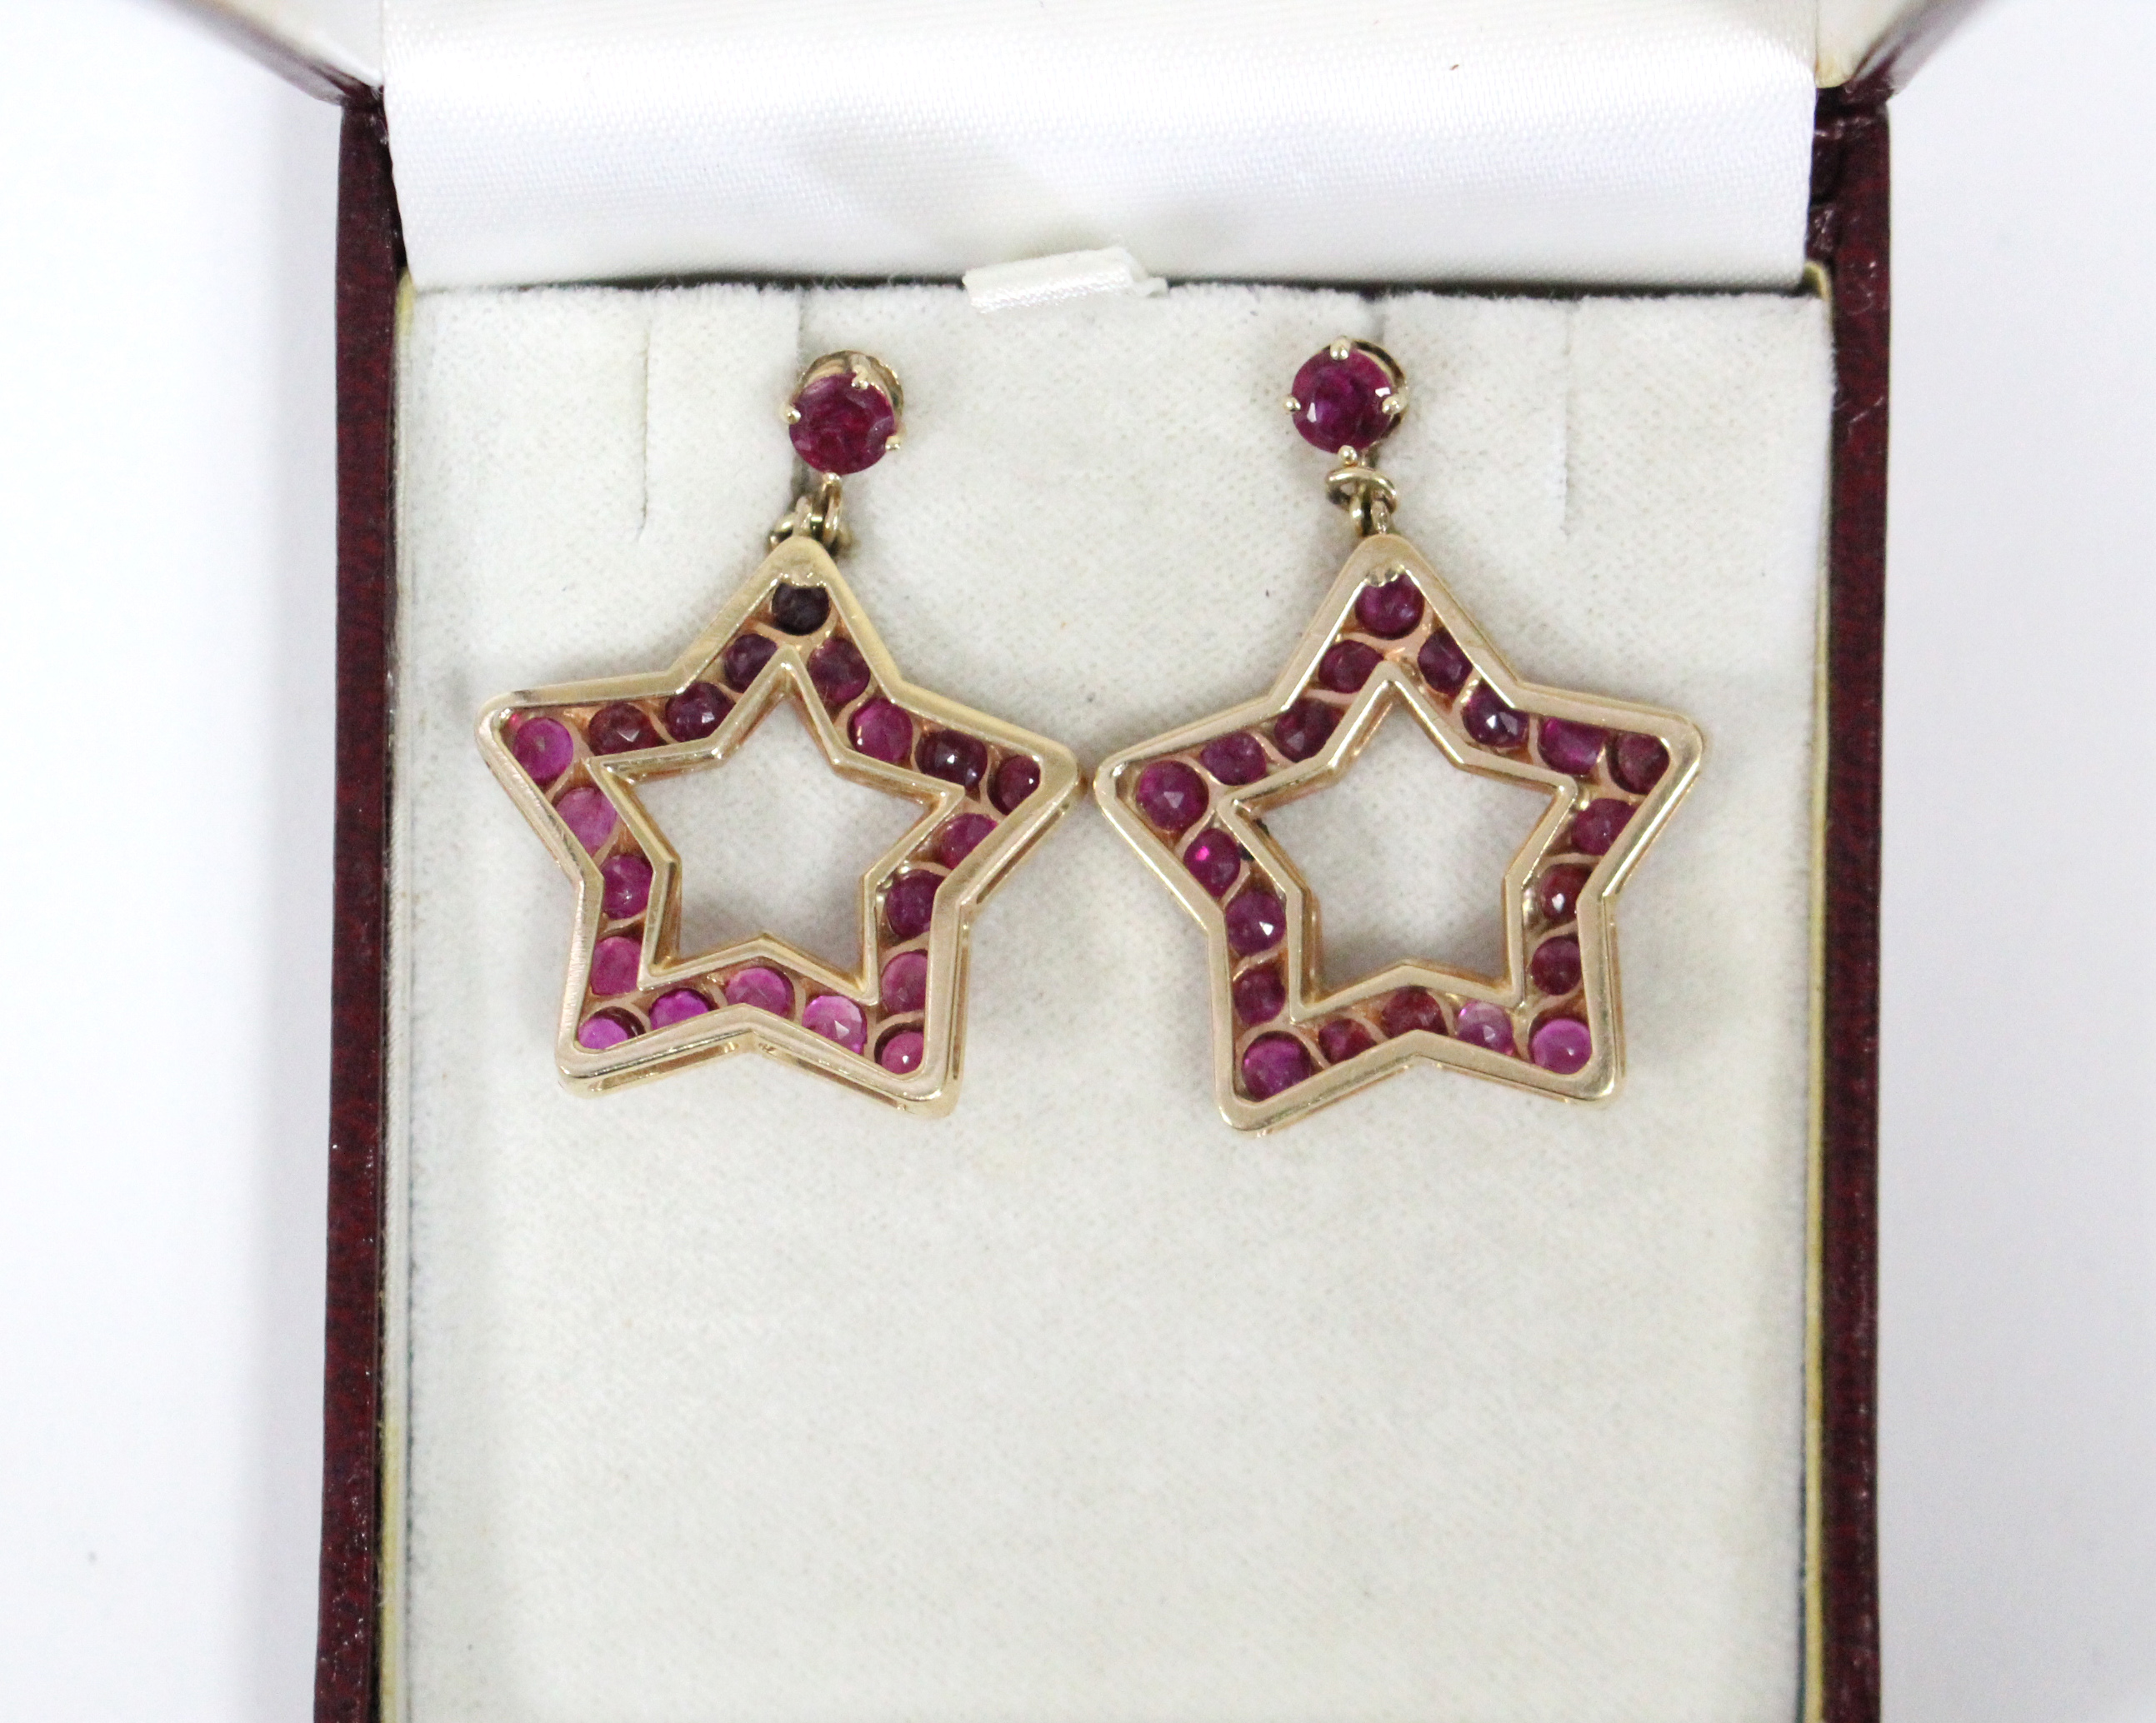 A PAIR OF RUBY PENDANT EARRINGS, each of open five-pointed star shape, set twenty round-cut stones - Image 6 of 6